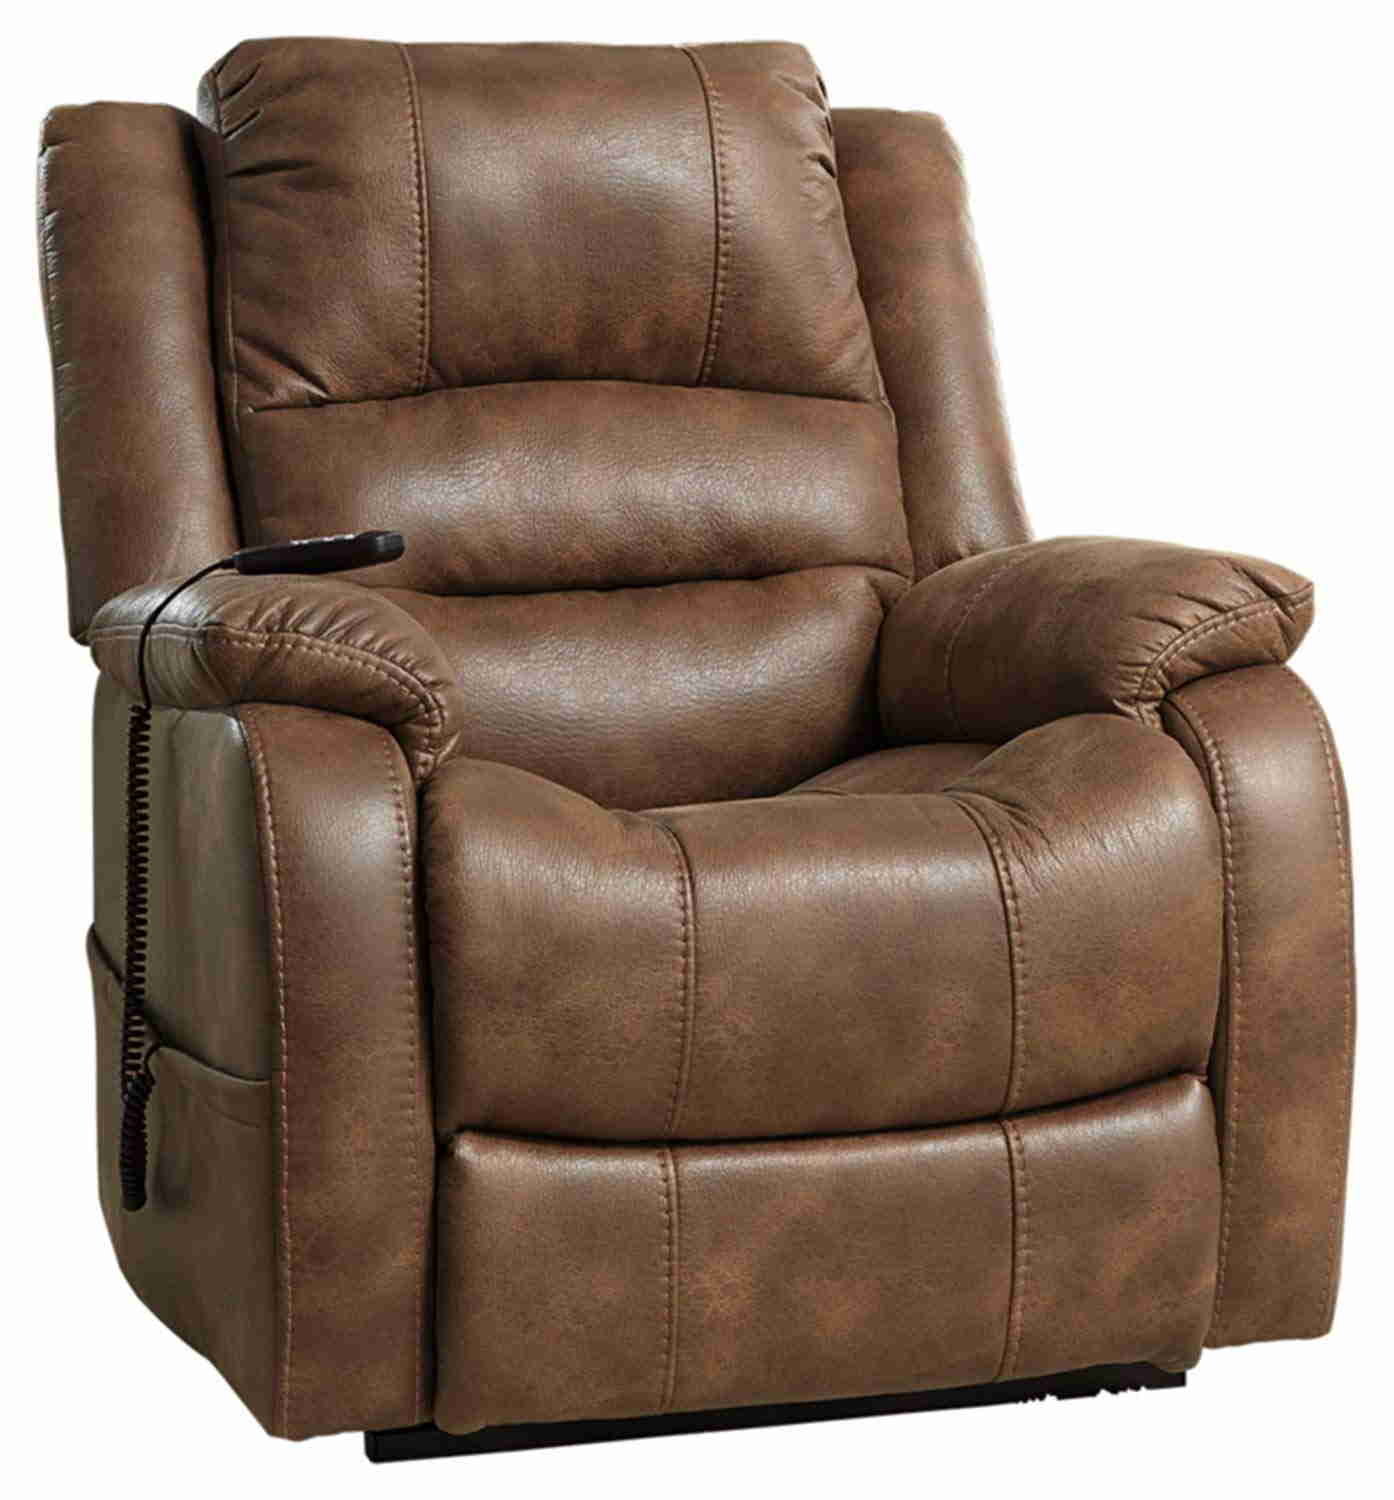 Top 10 Electric Recliner Chairs for the Elderly - 2021 Reviews & Guide